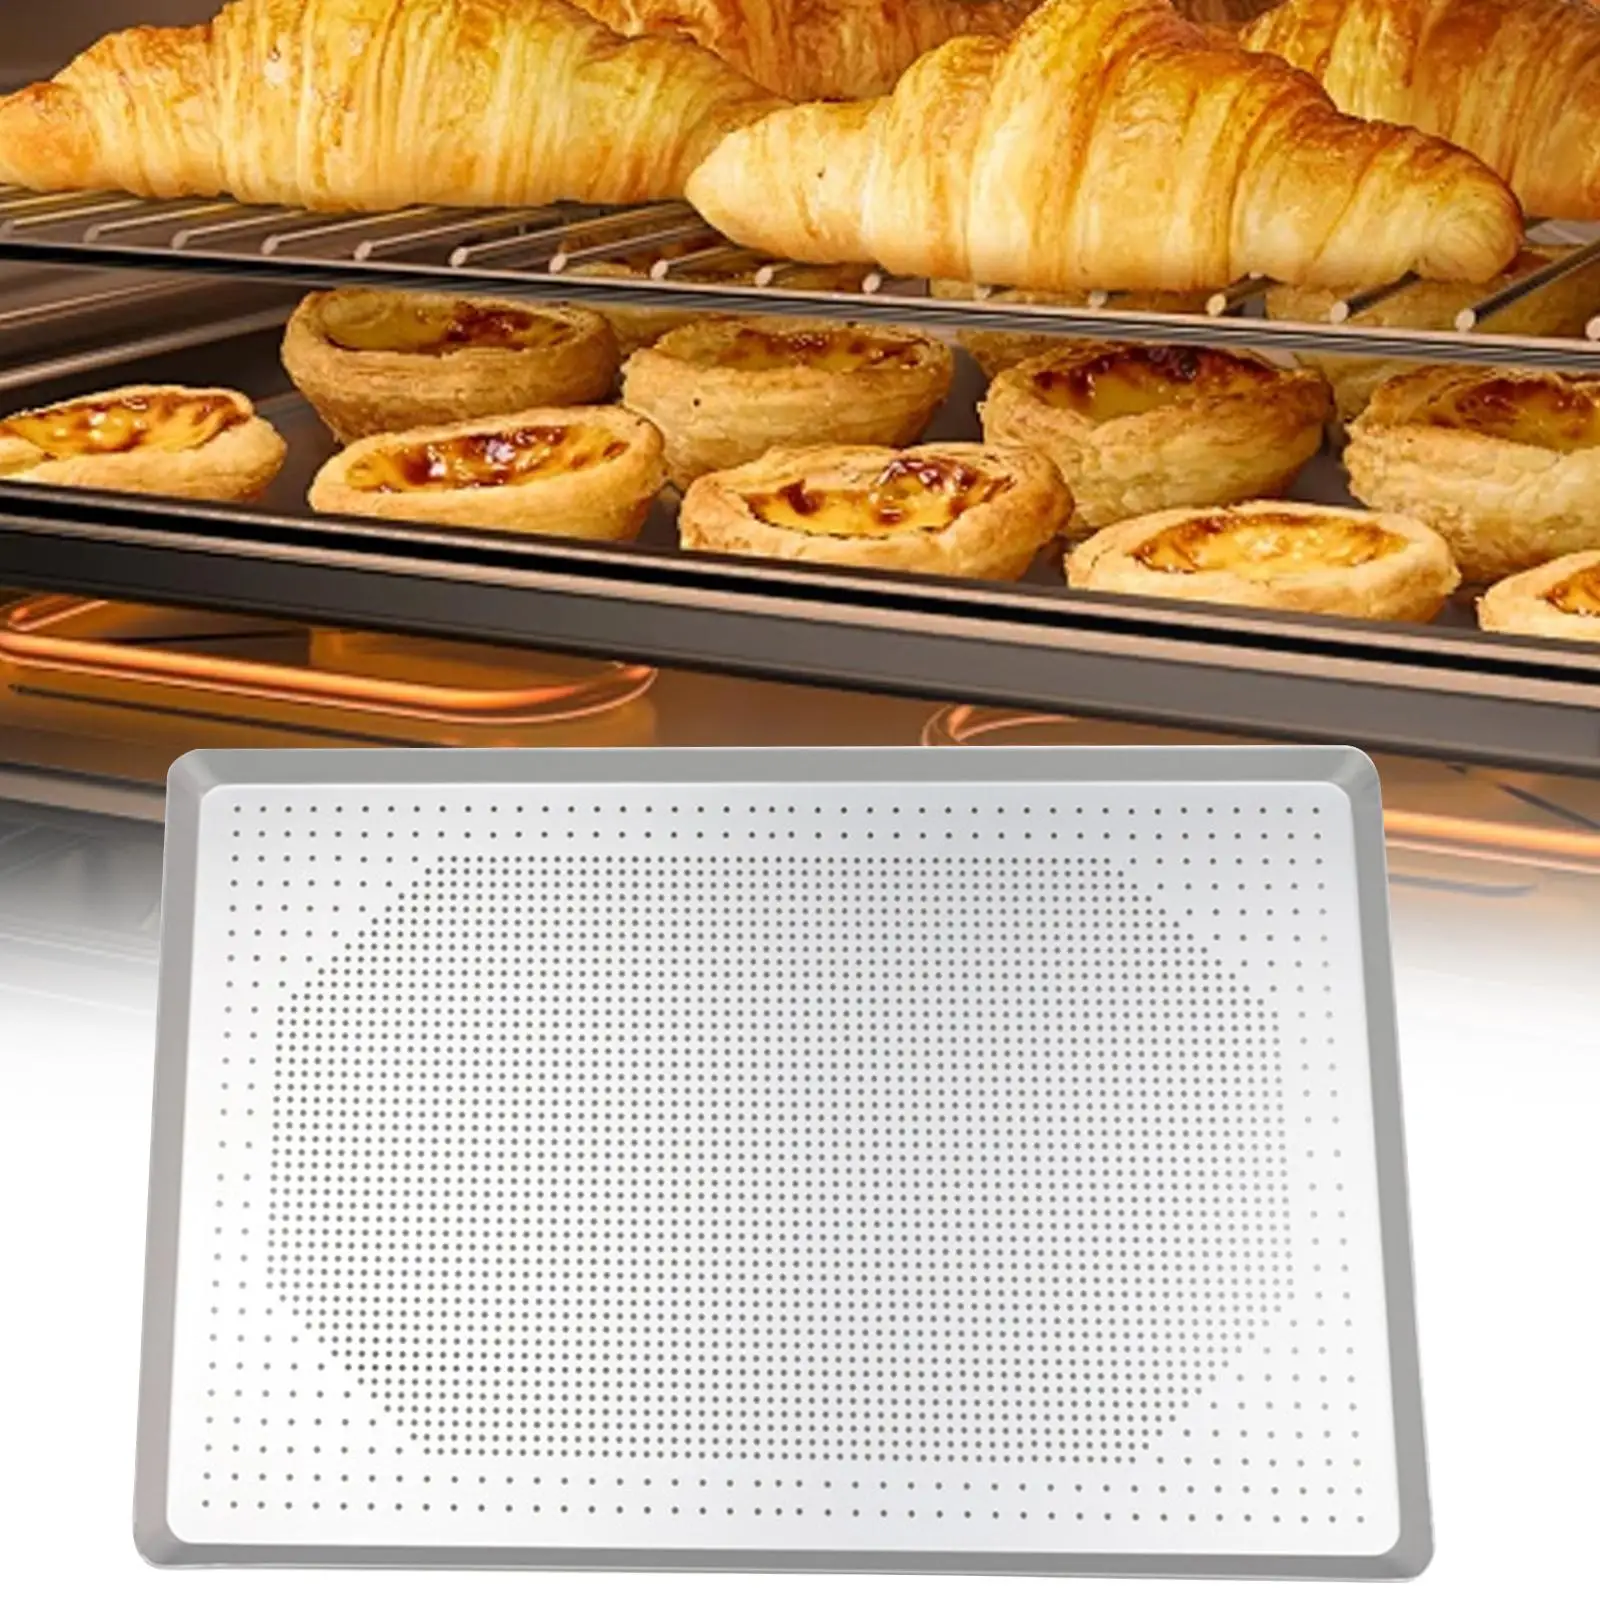 Aluminum Perforated Sheet Pan Pizza Pan, Bakeware,Oven Tray Baking Pan Cookie Sheet for Party Home Restaurant Baking Roasting